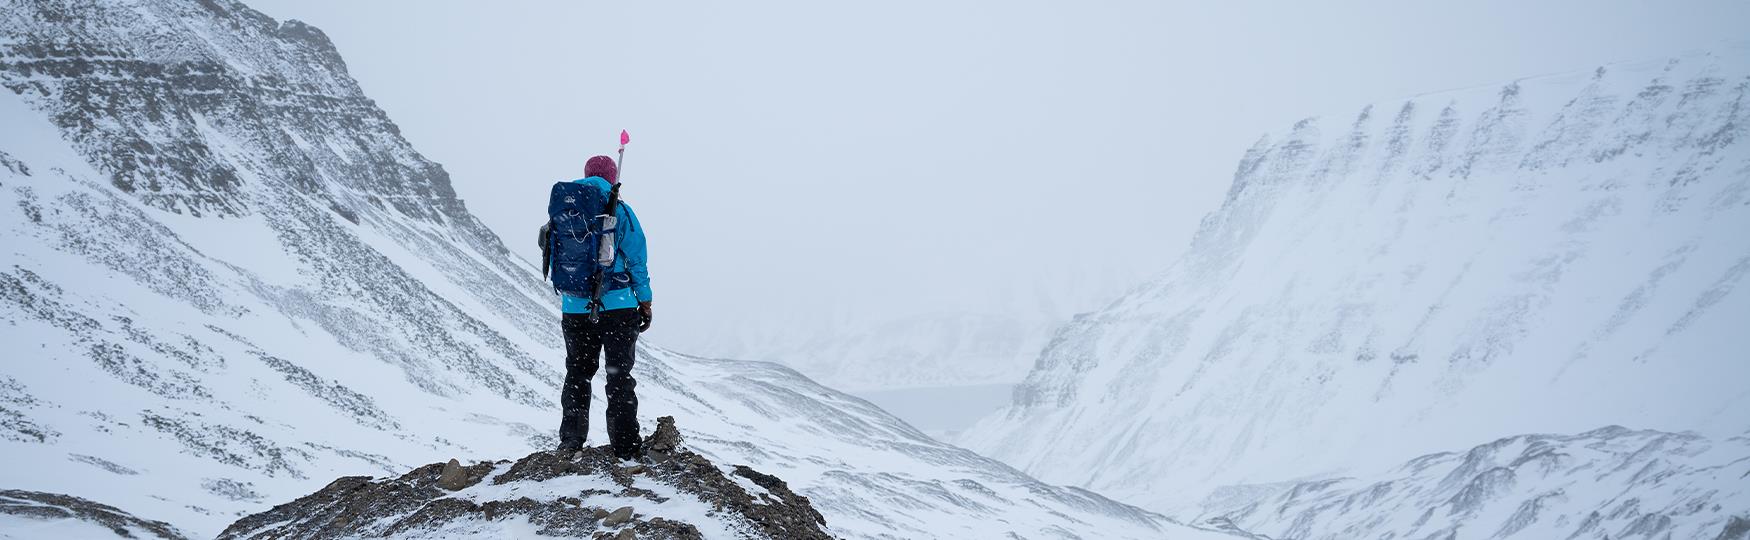 A guide with a backpack and a rifle on top of a cliff looking at a snow-covered mountainous landscape